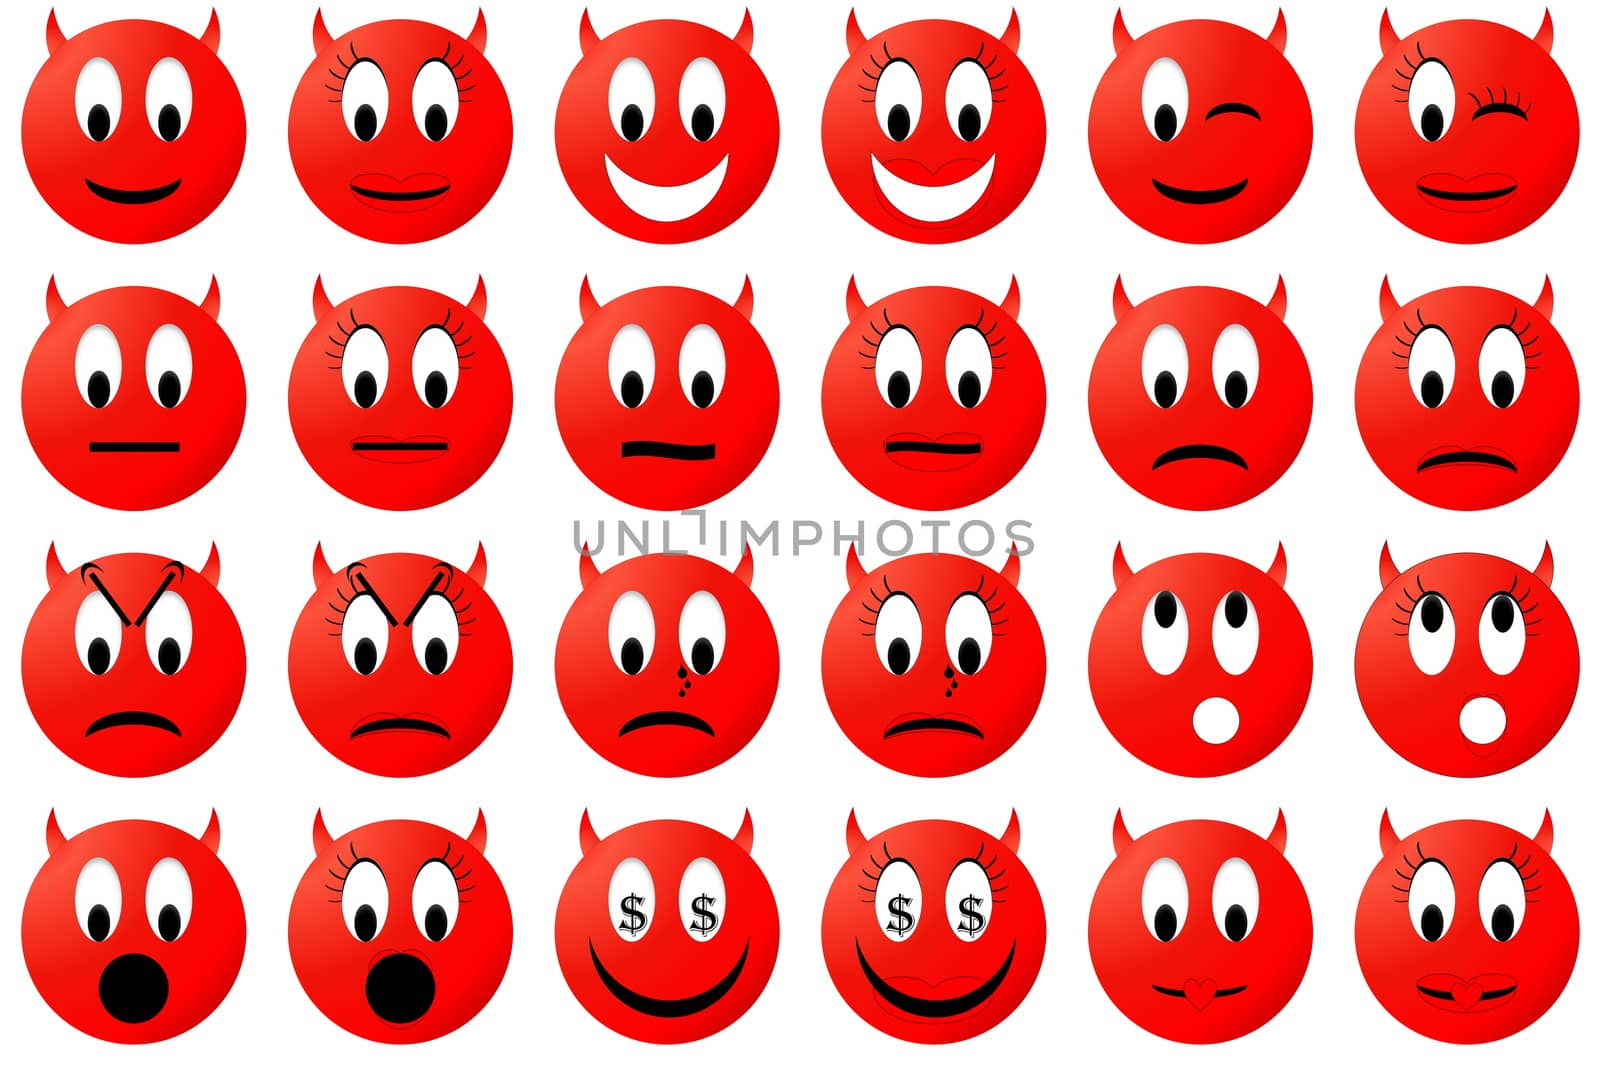 Red male and female devil emoticons set or collection isolated in white background